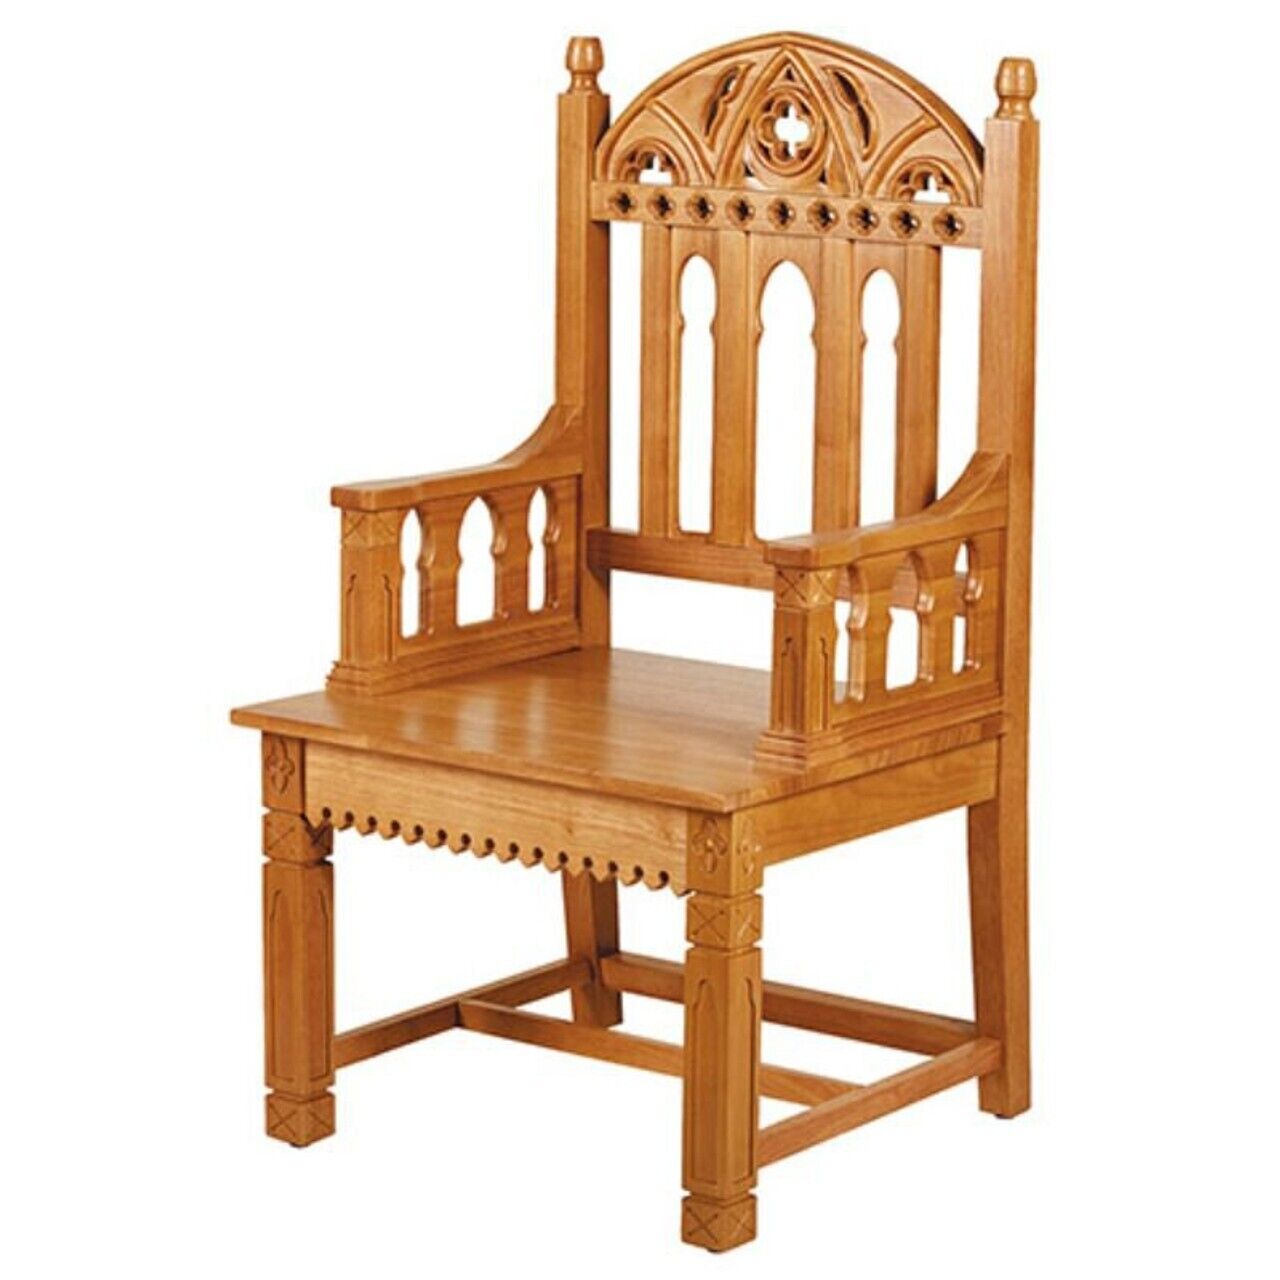 Gothic Light Stain Maple Hardwood Celebrant Chair for Church Use 48 In